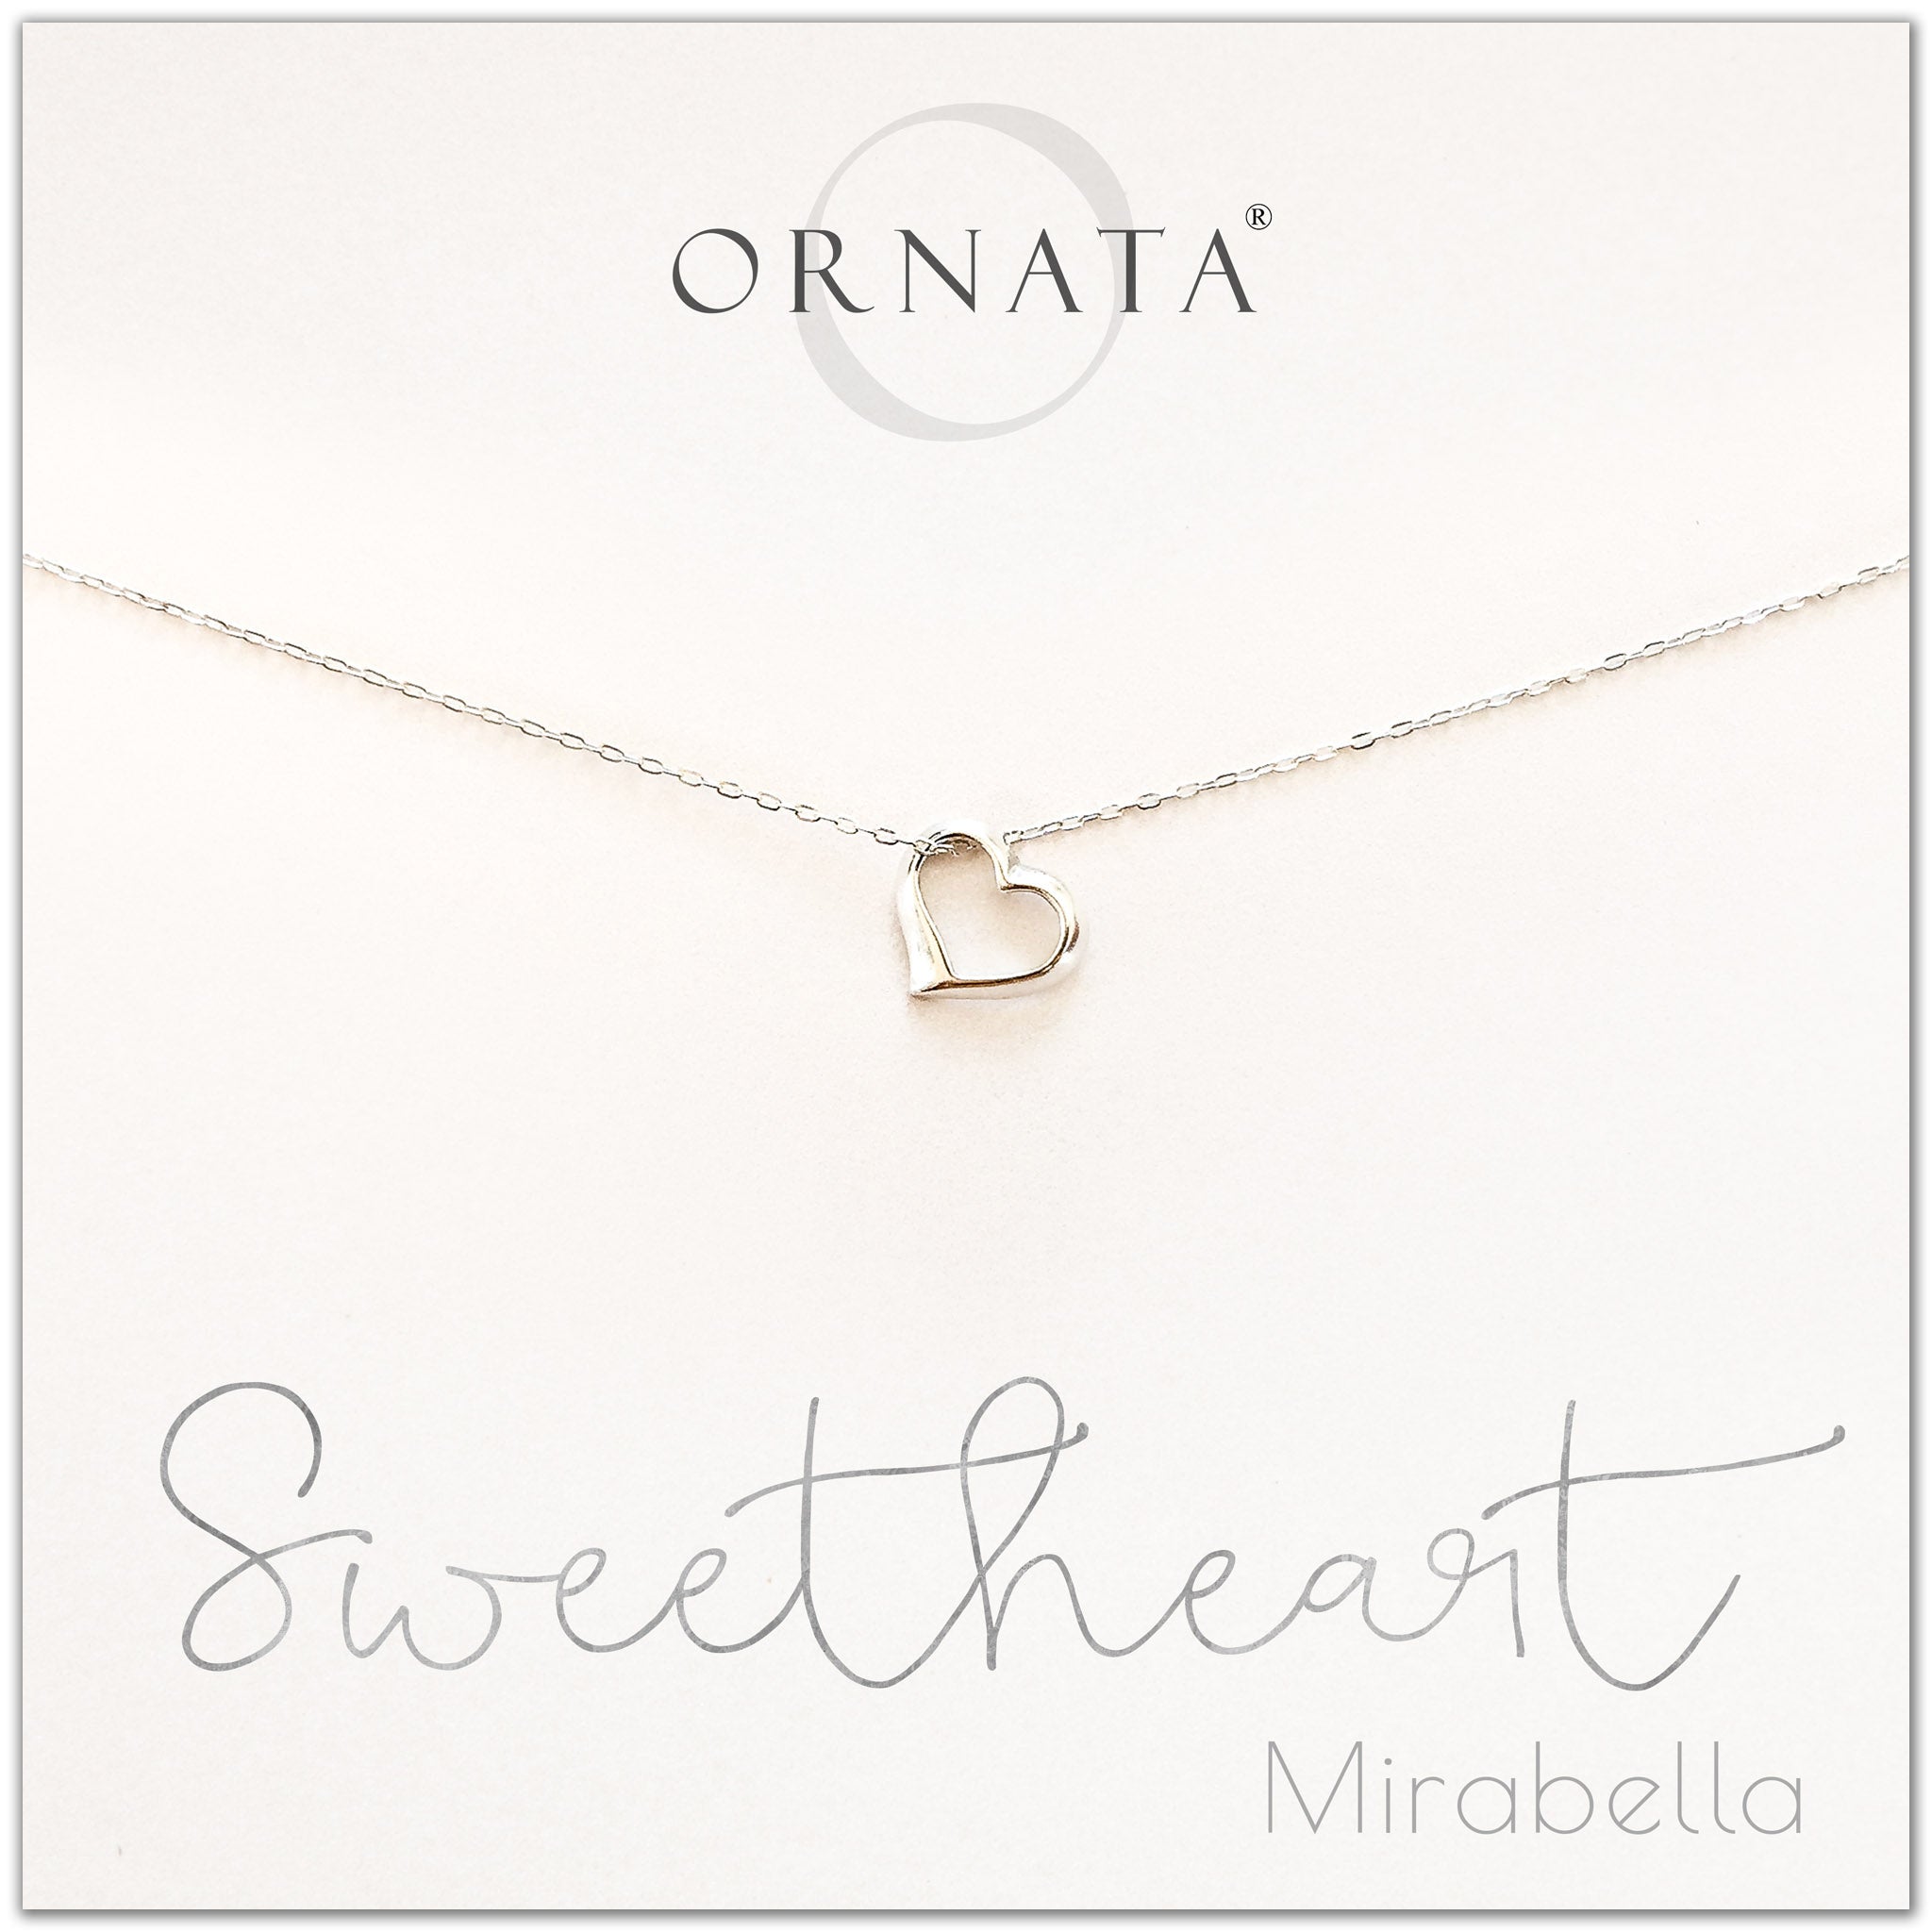 Delicate sweetheart necklace - personalized silver heart necklace. Our sterling silver custom jewelry is a perfect gift for girlfriends, wives, mothers, nieces, daughters, best friends, sisters, significant others, newlyweds, and soul mates - symbolic heart necklace.